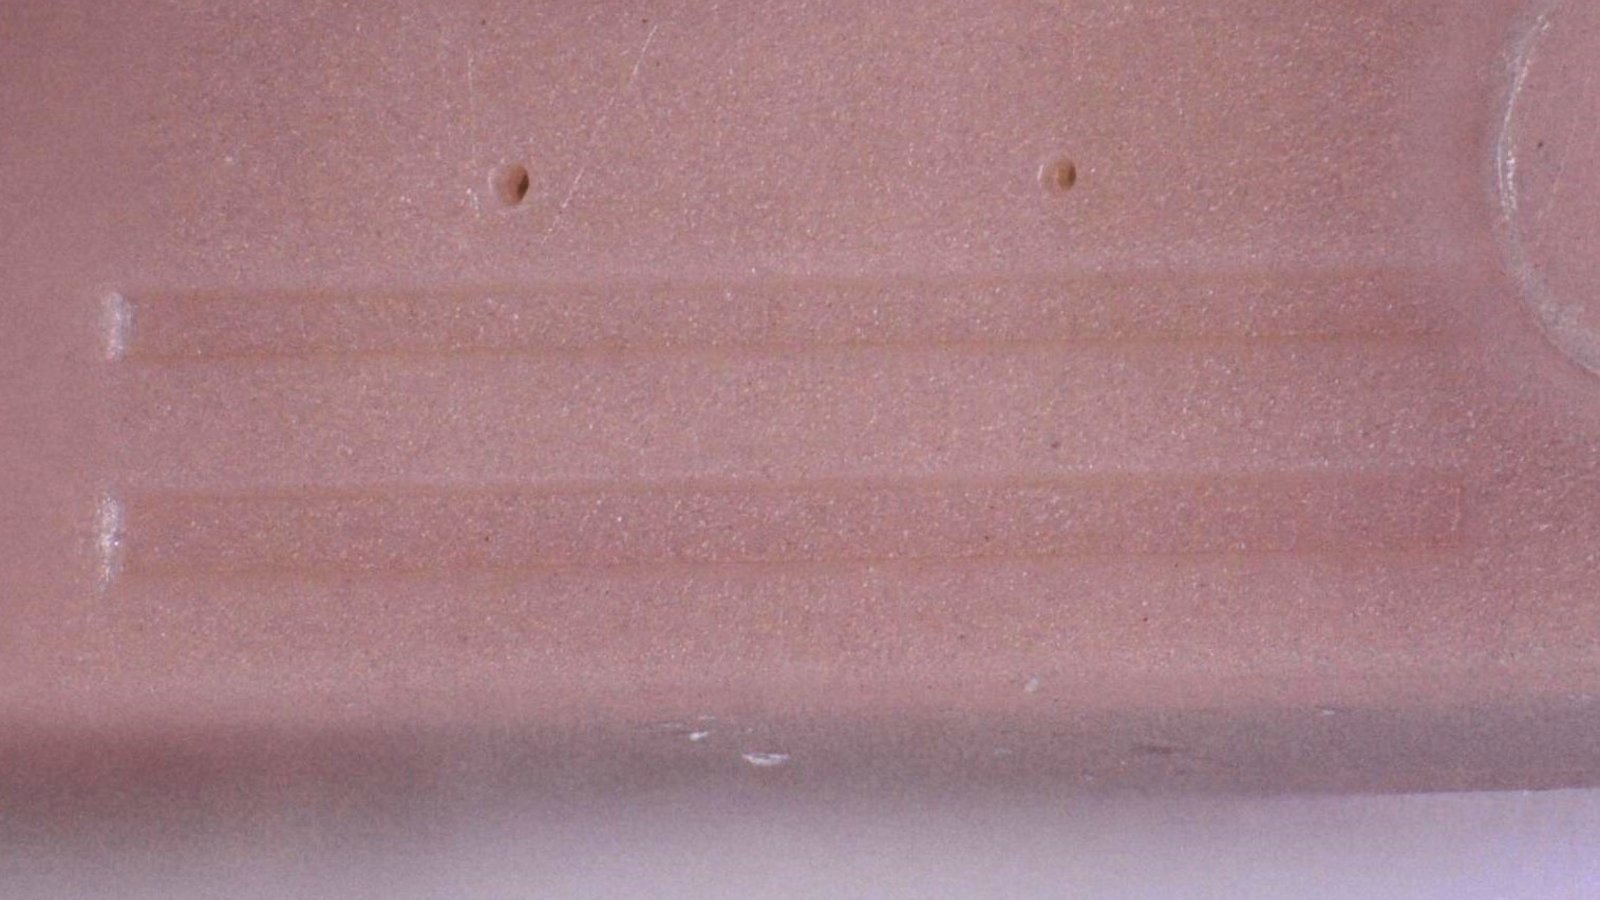 Close-up of a micro-molded plastic part demonstrating Cicor's precision plastics capabilities.